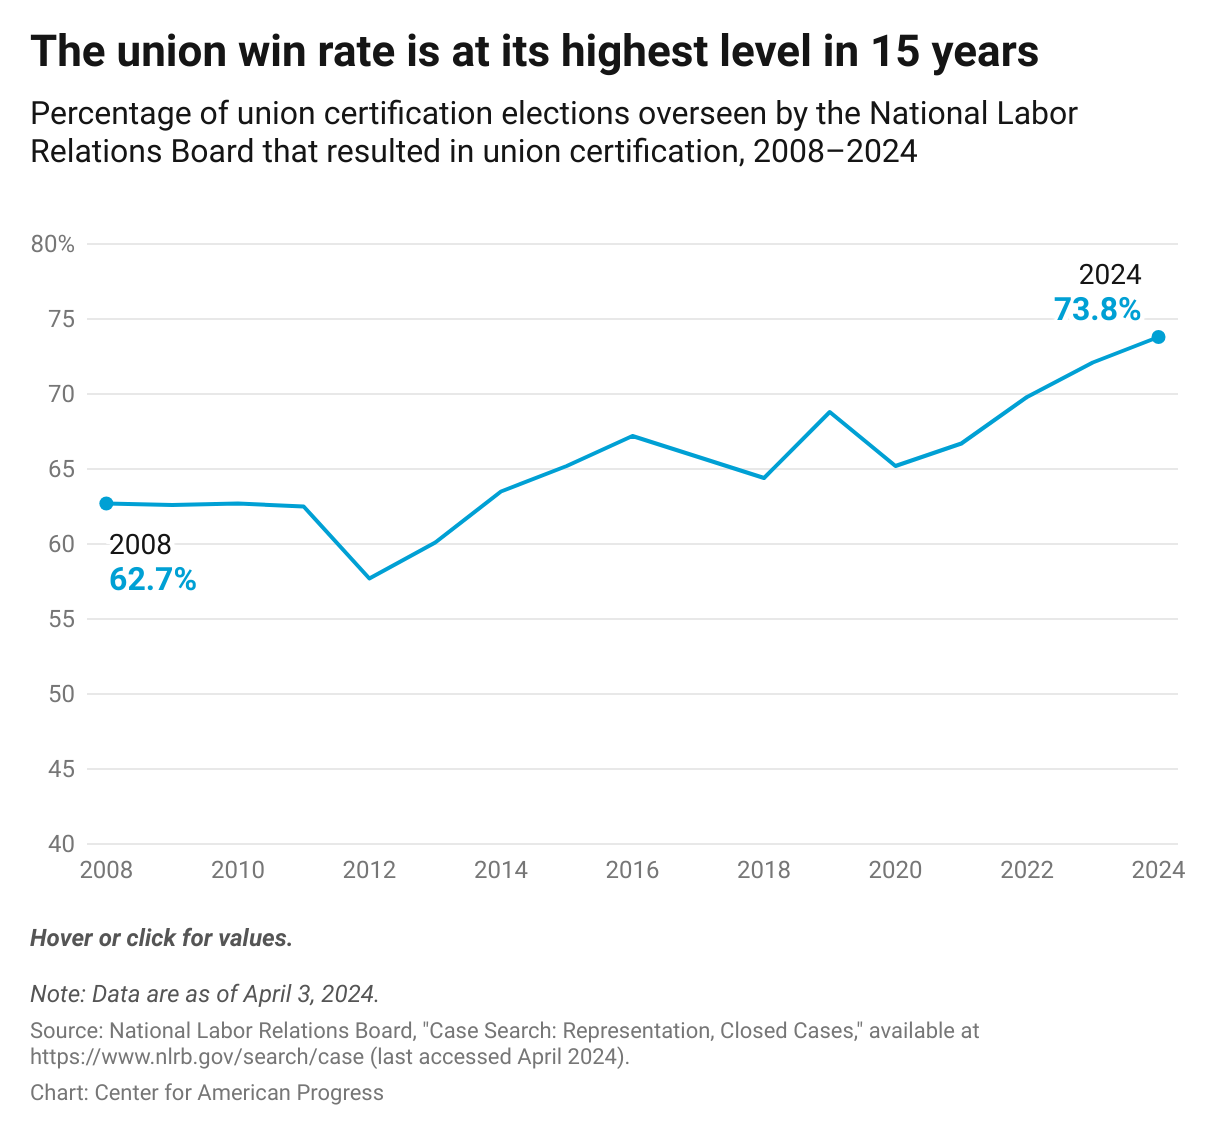 Line chart showing that from 2020 to 2024, the percentage of election certifications at the NLRB won by labor unions increased each year, reaching 73.8 percent in 2024.